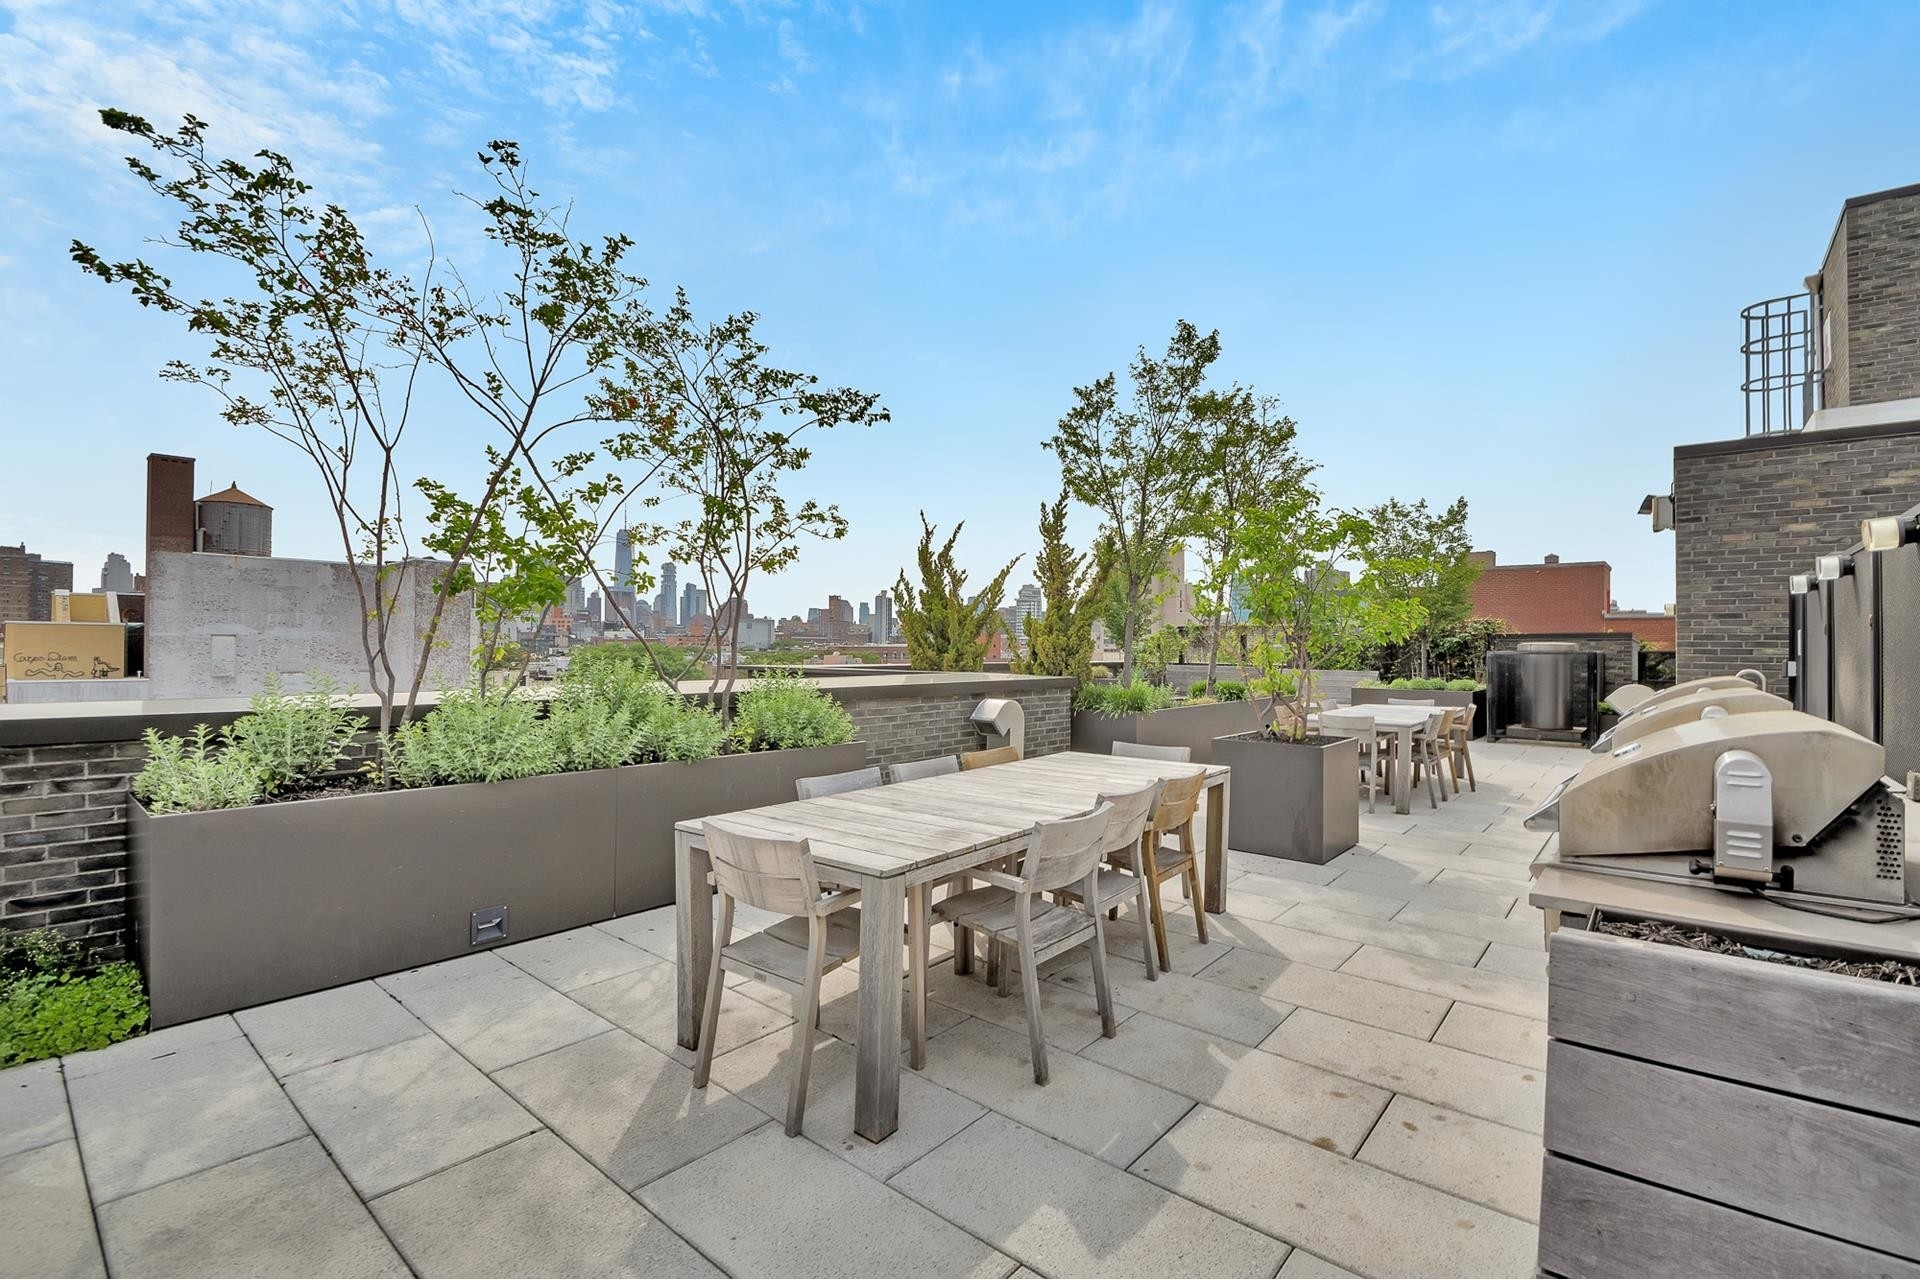 15. Condominiums for Sale at Steiner East Villag, 438 E 12TH ST, 3E East Village, New York, NY 10009